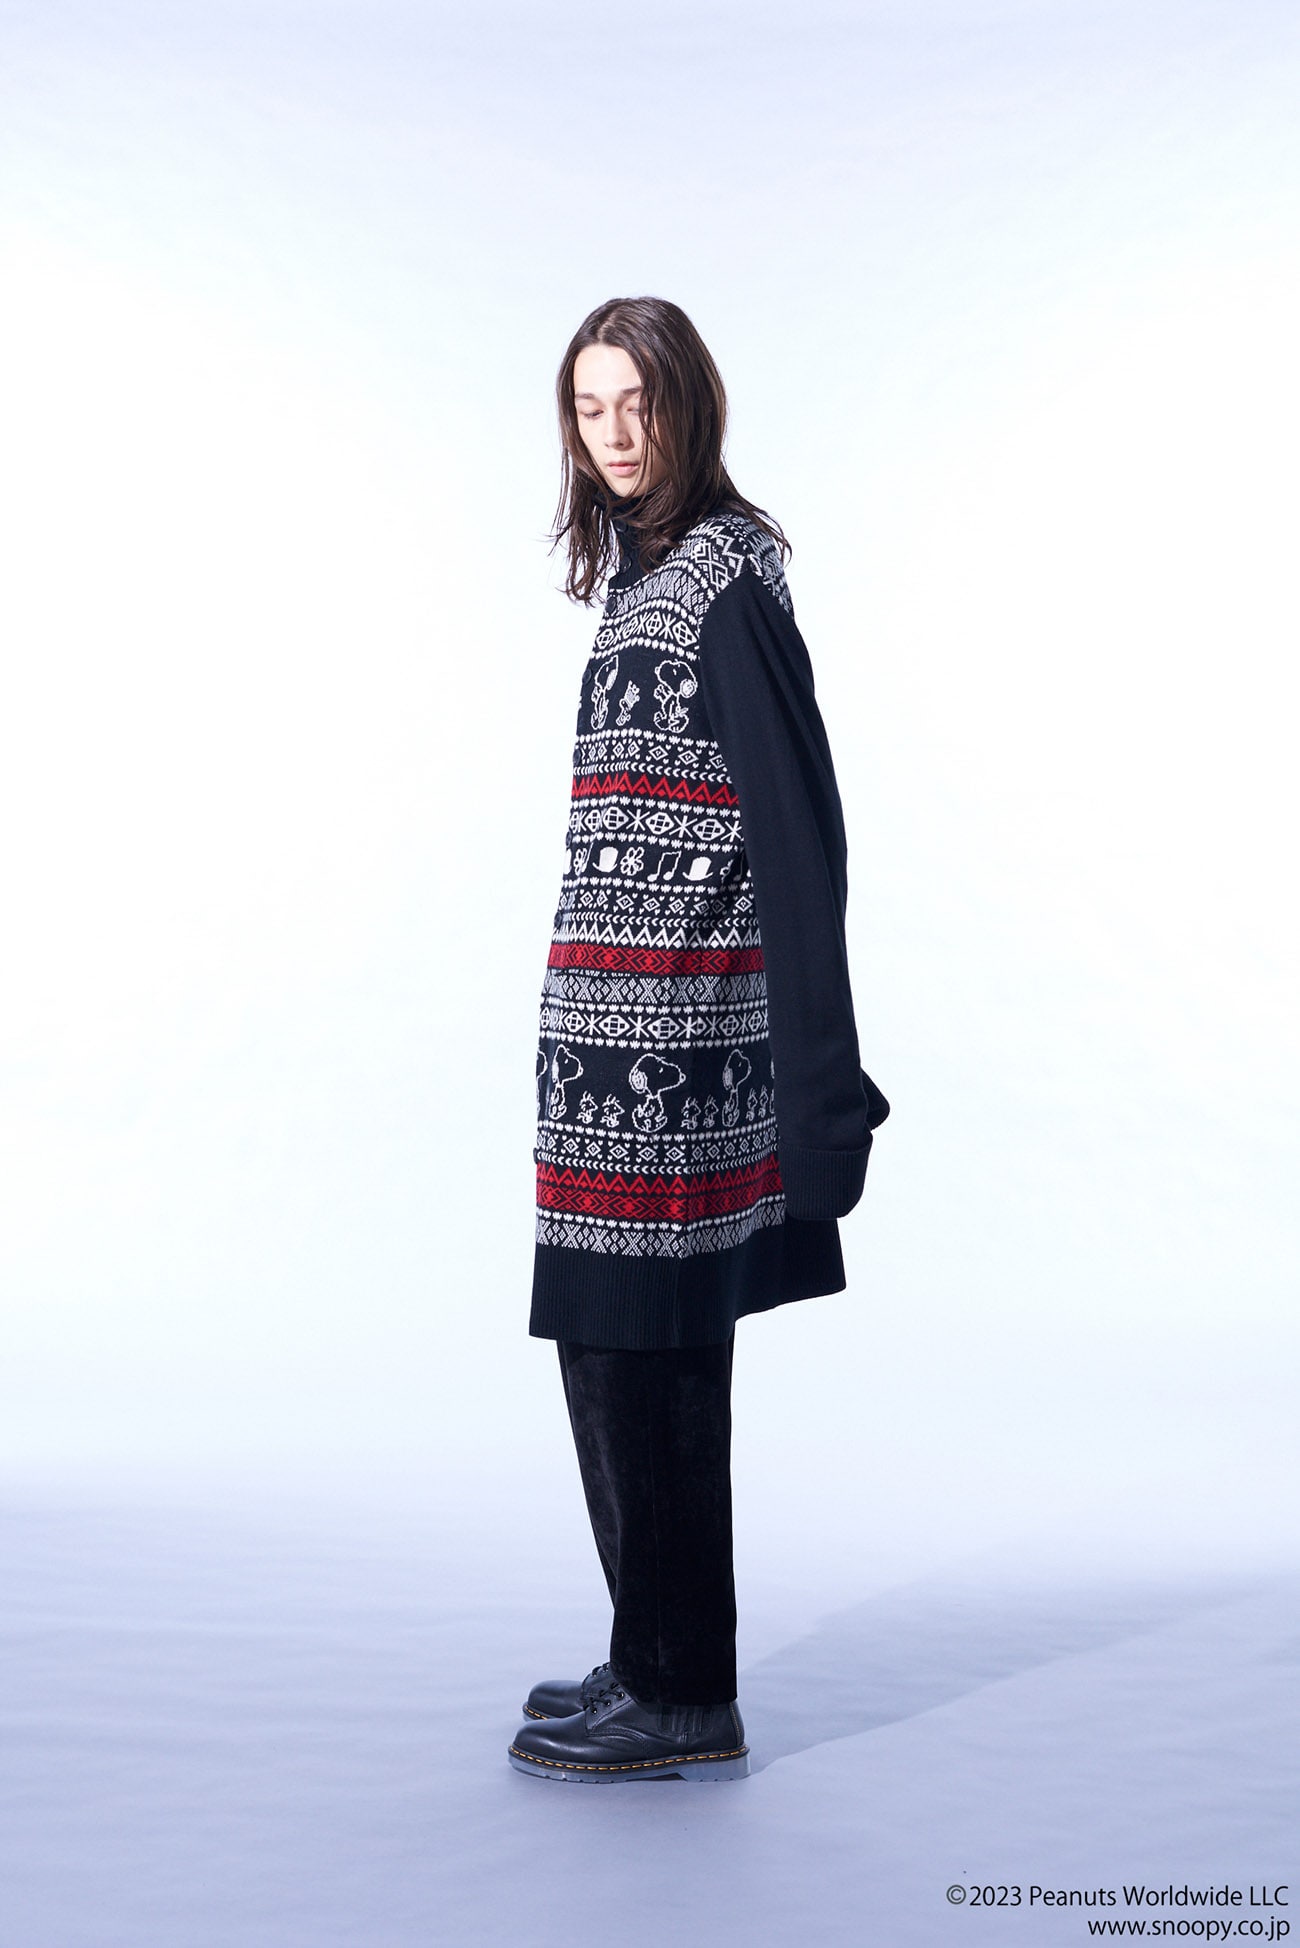 S'YTE x PEANUTS BULKY WOOL UNIQUE NORDIC PATTERN LONG CARDIGAN